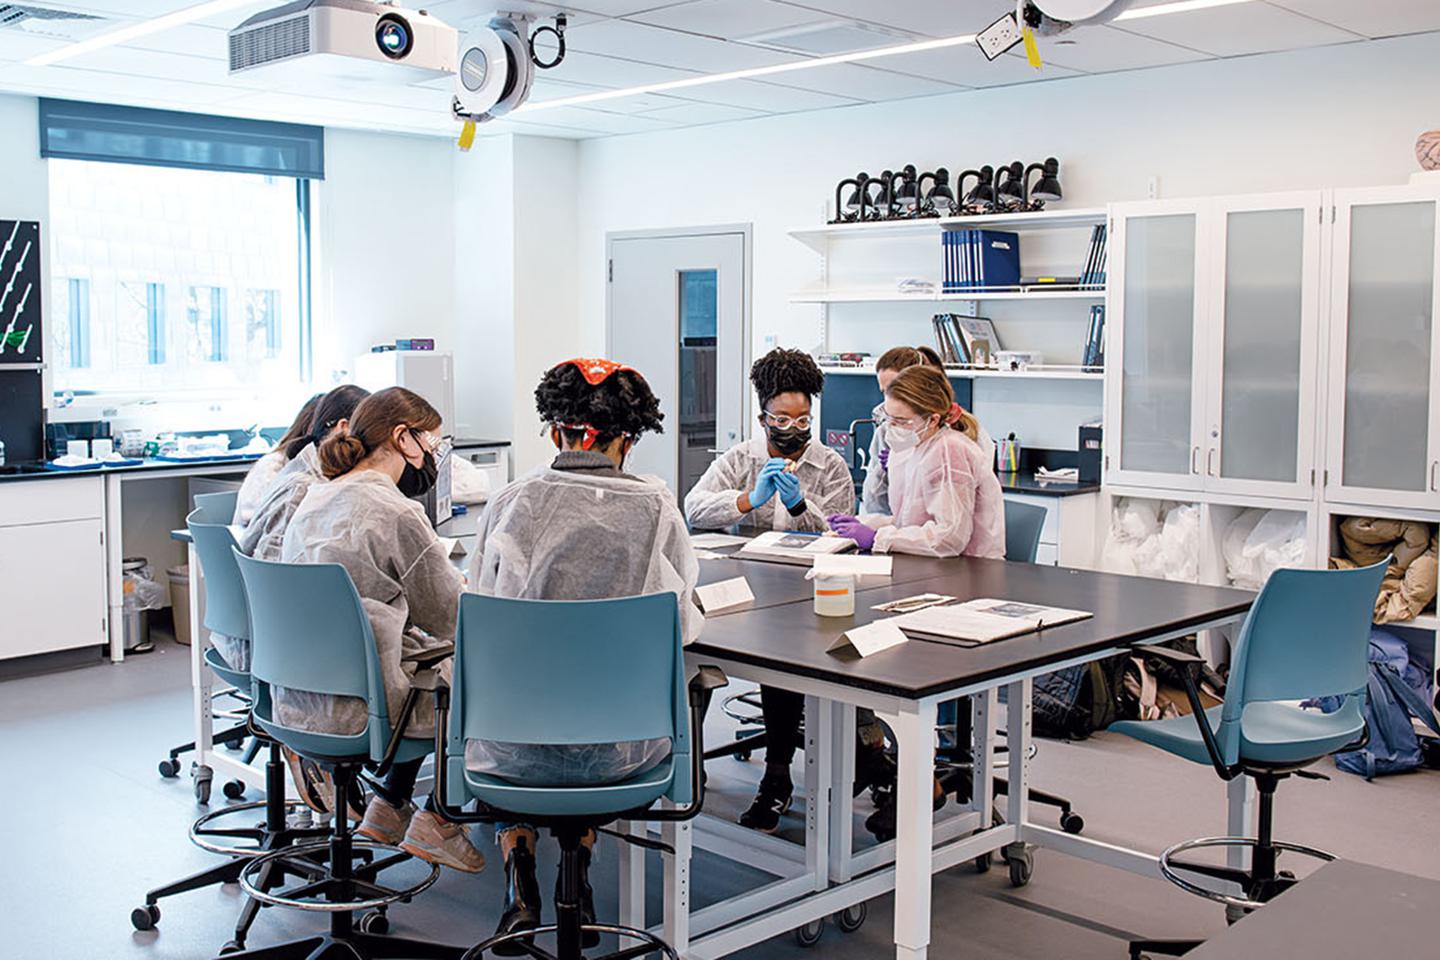 Neuroscience students work together in a spacious lab filled with natural light.